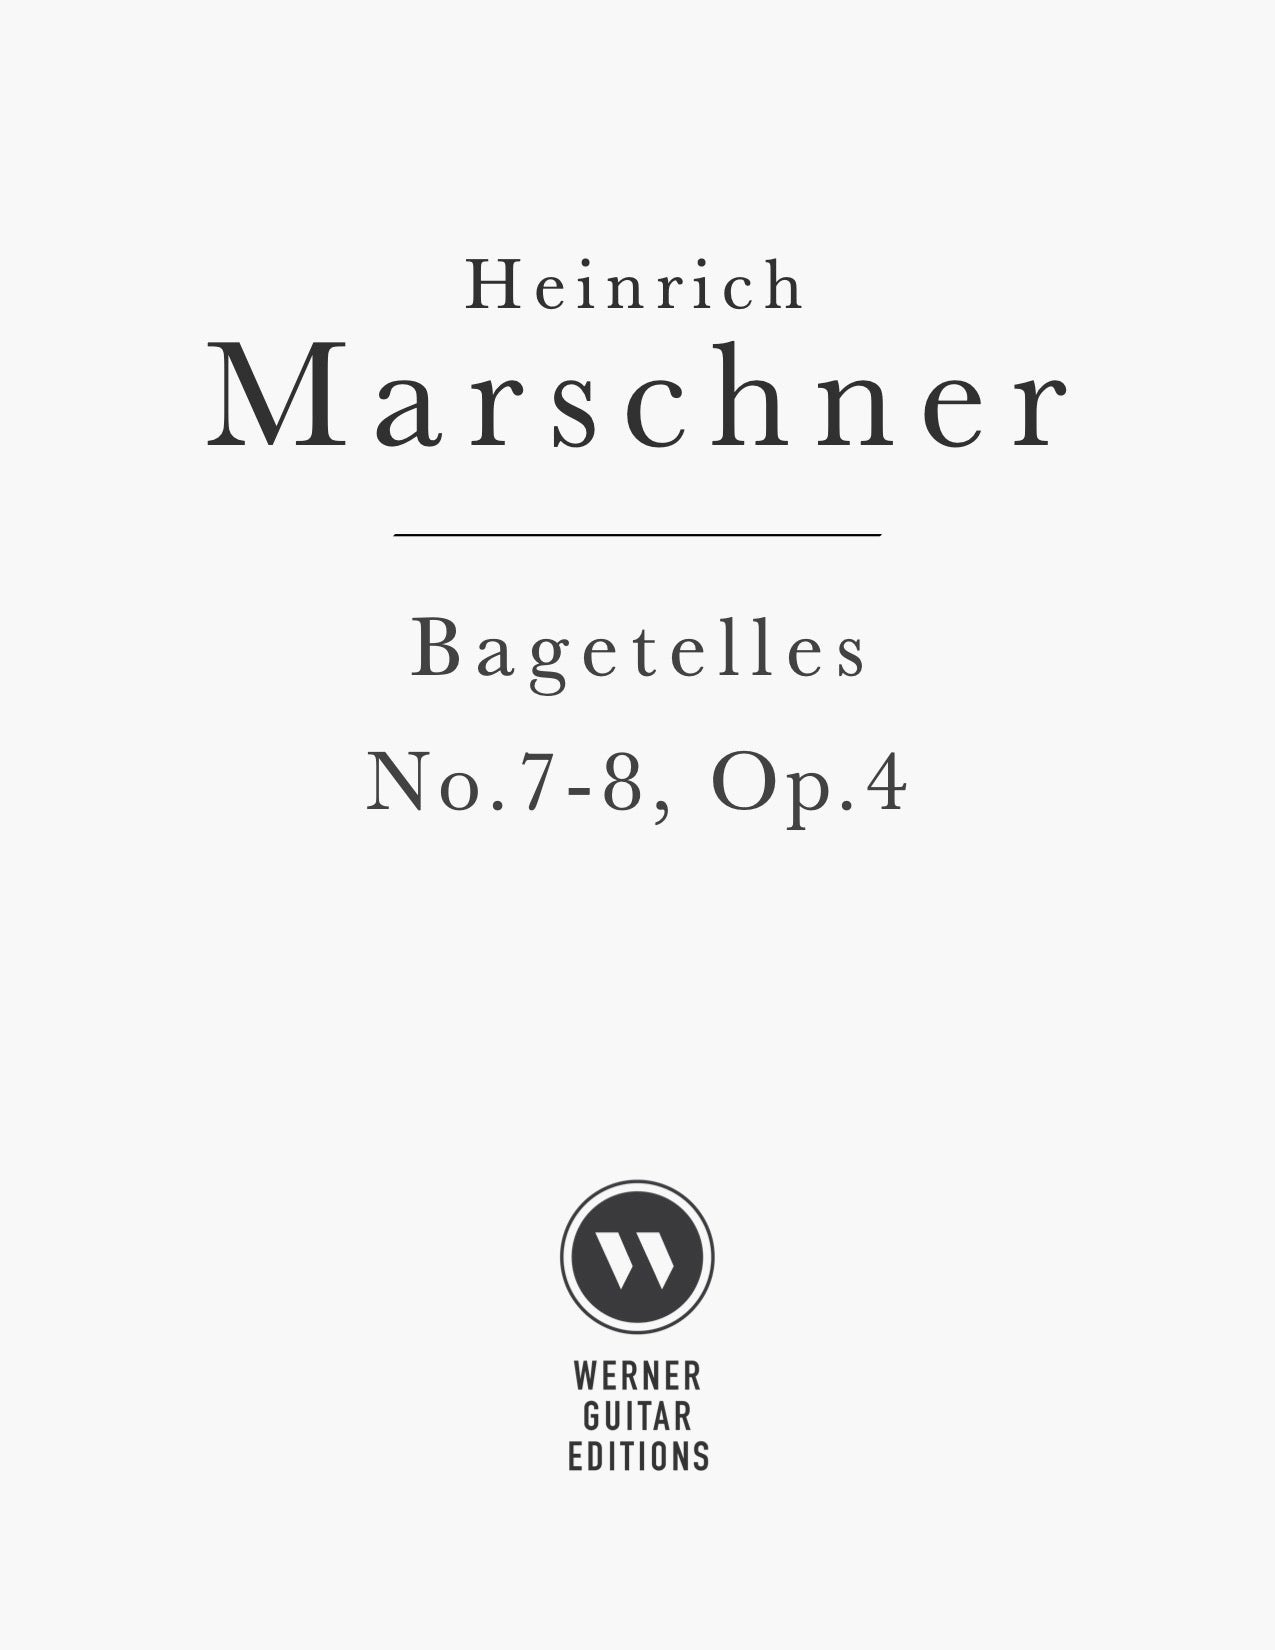 Bagatelle No.7 & No.8, Op.4 by Heinrich Marschner (1795-1861) - PDF Sheet Music for Classical Guitar.